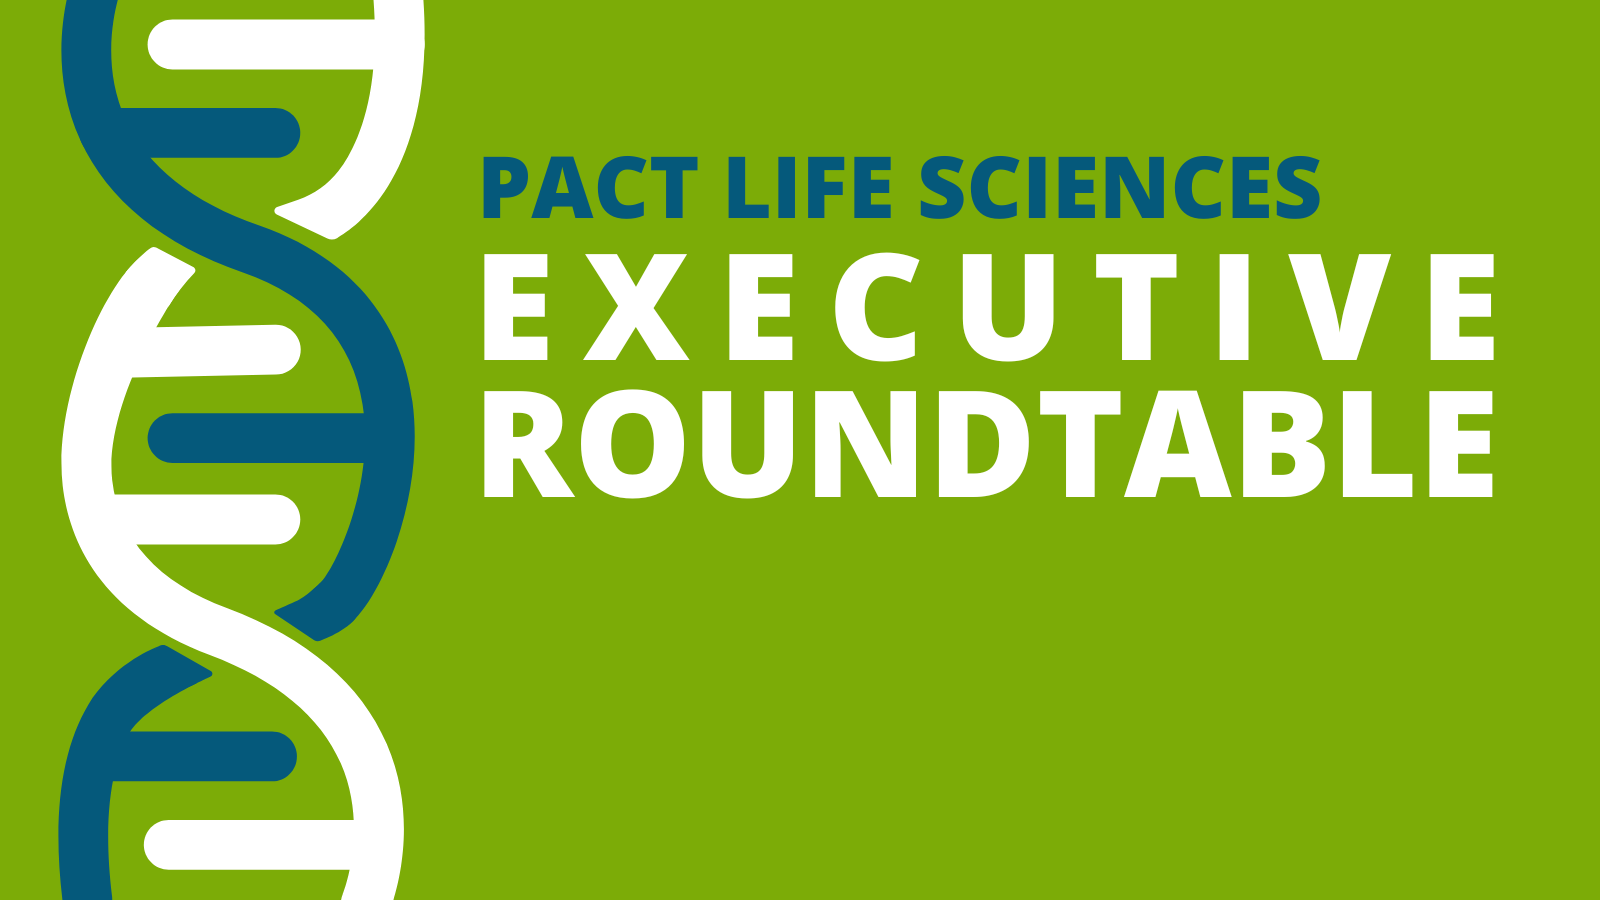 Shares the logo of the PACT Life Sciences Executive Roundtable series